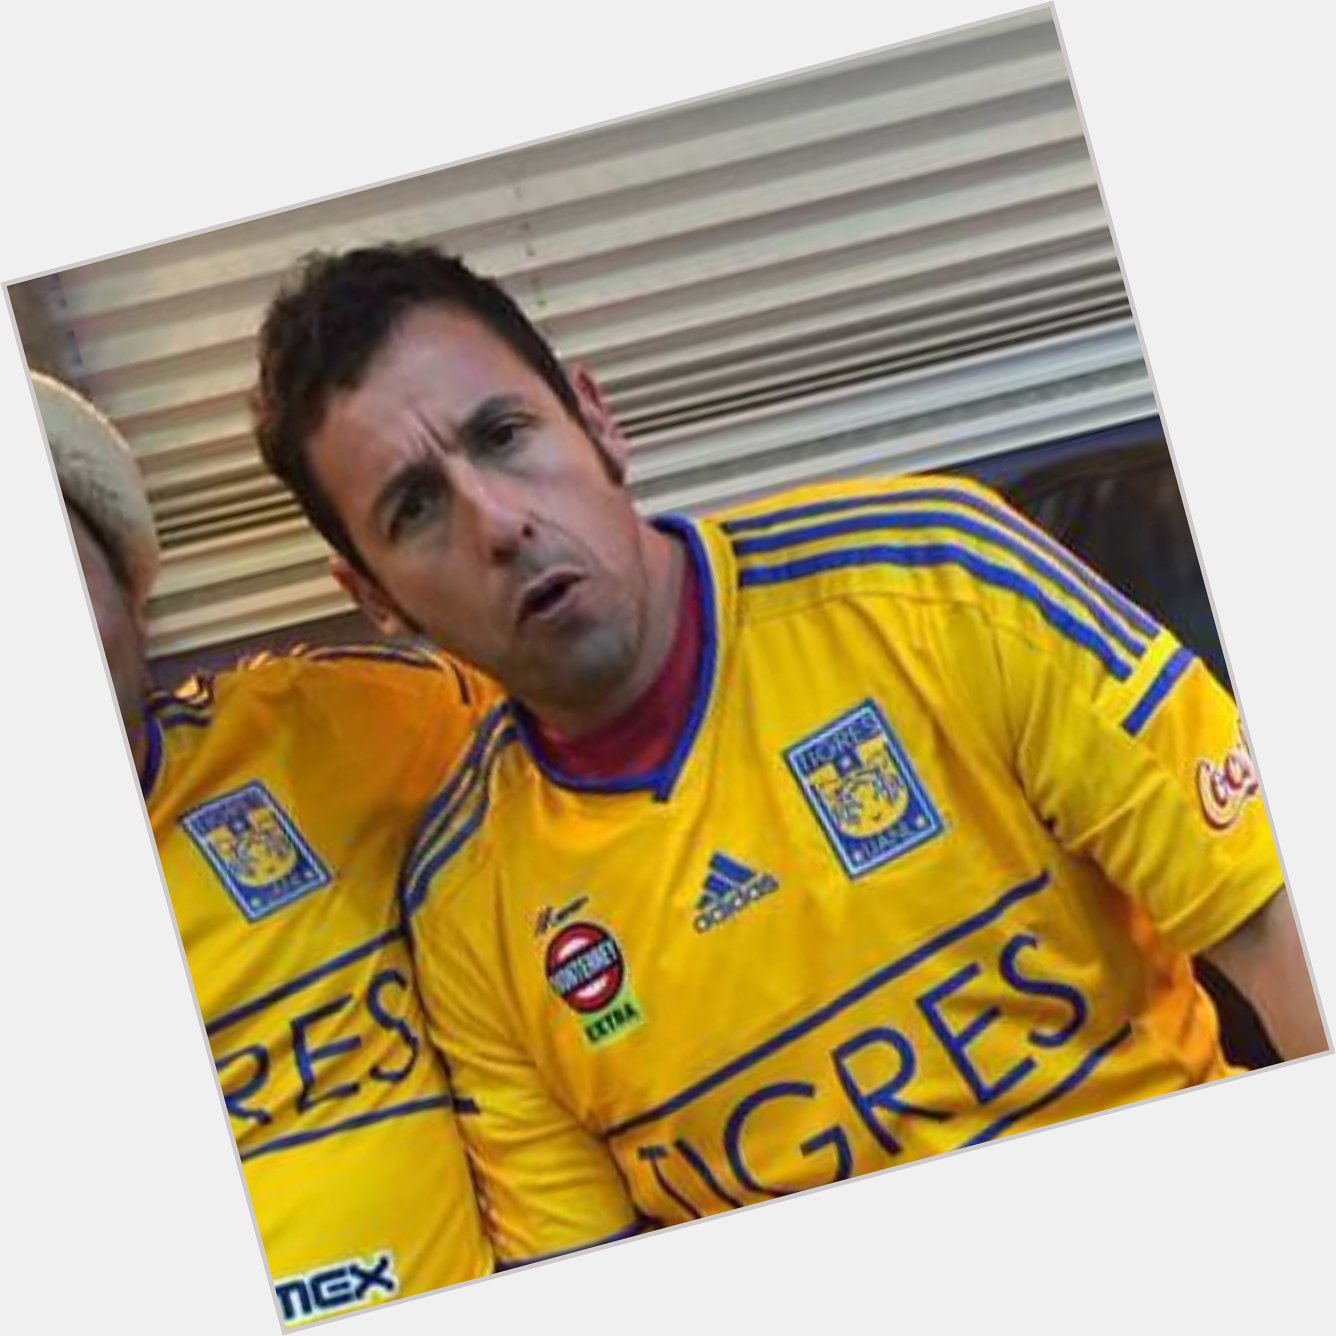 Happy 55th birthday to legendary actor/comedian Adam Sandler Repping the Tigres gang 